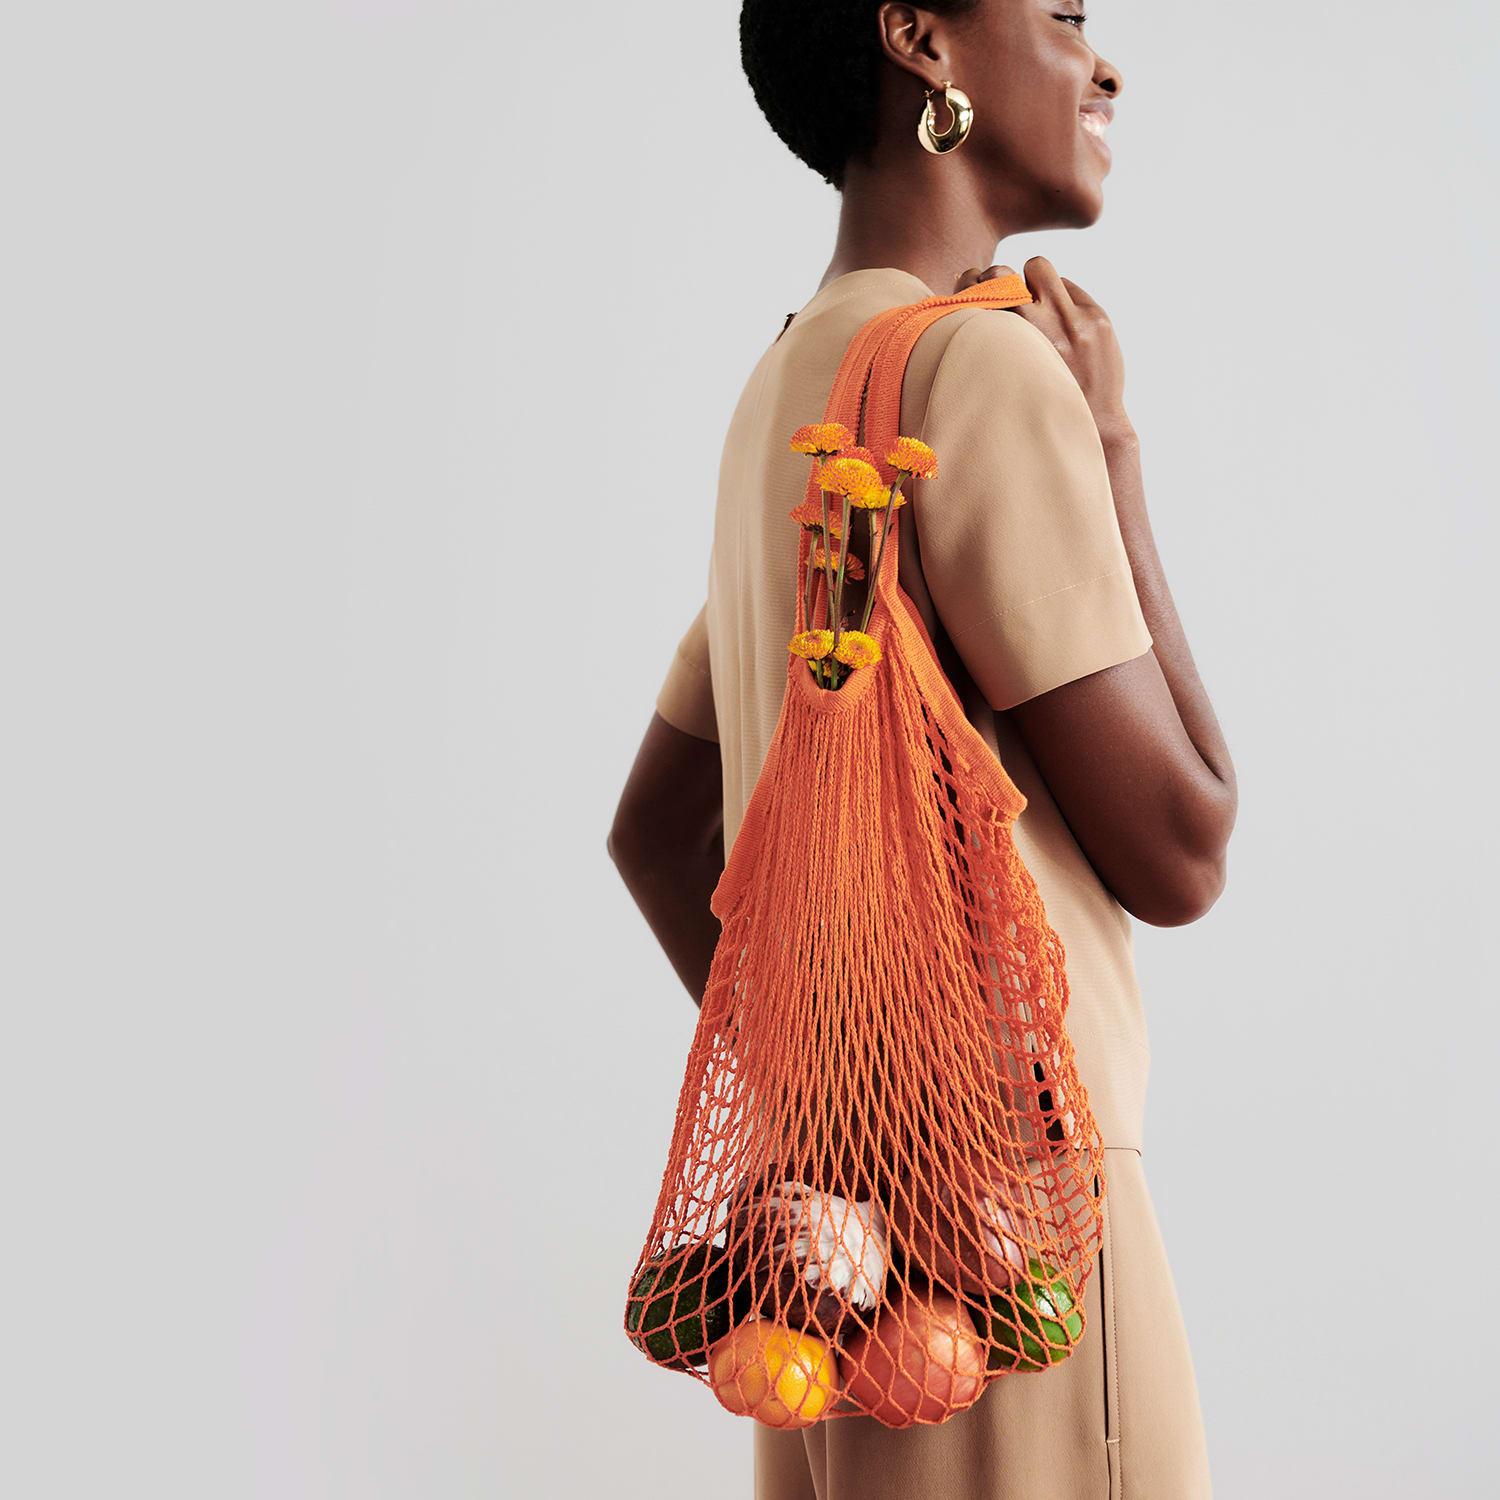 image of a woman wearing the annika top and elena culotte in light saddle holding a mesh bag of fruit